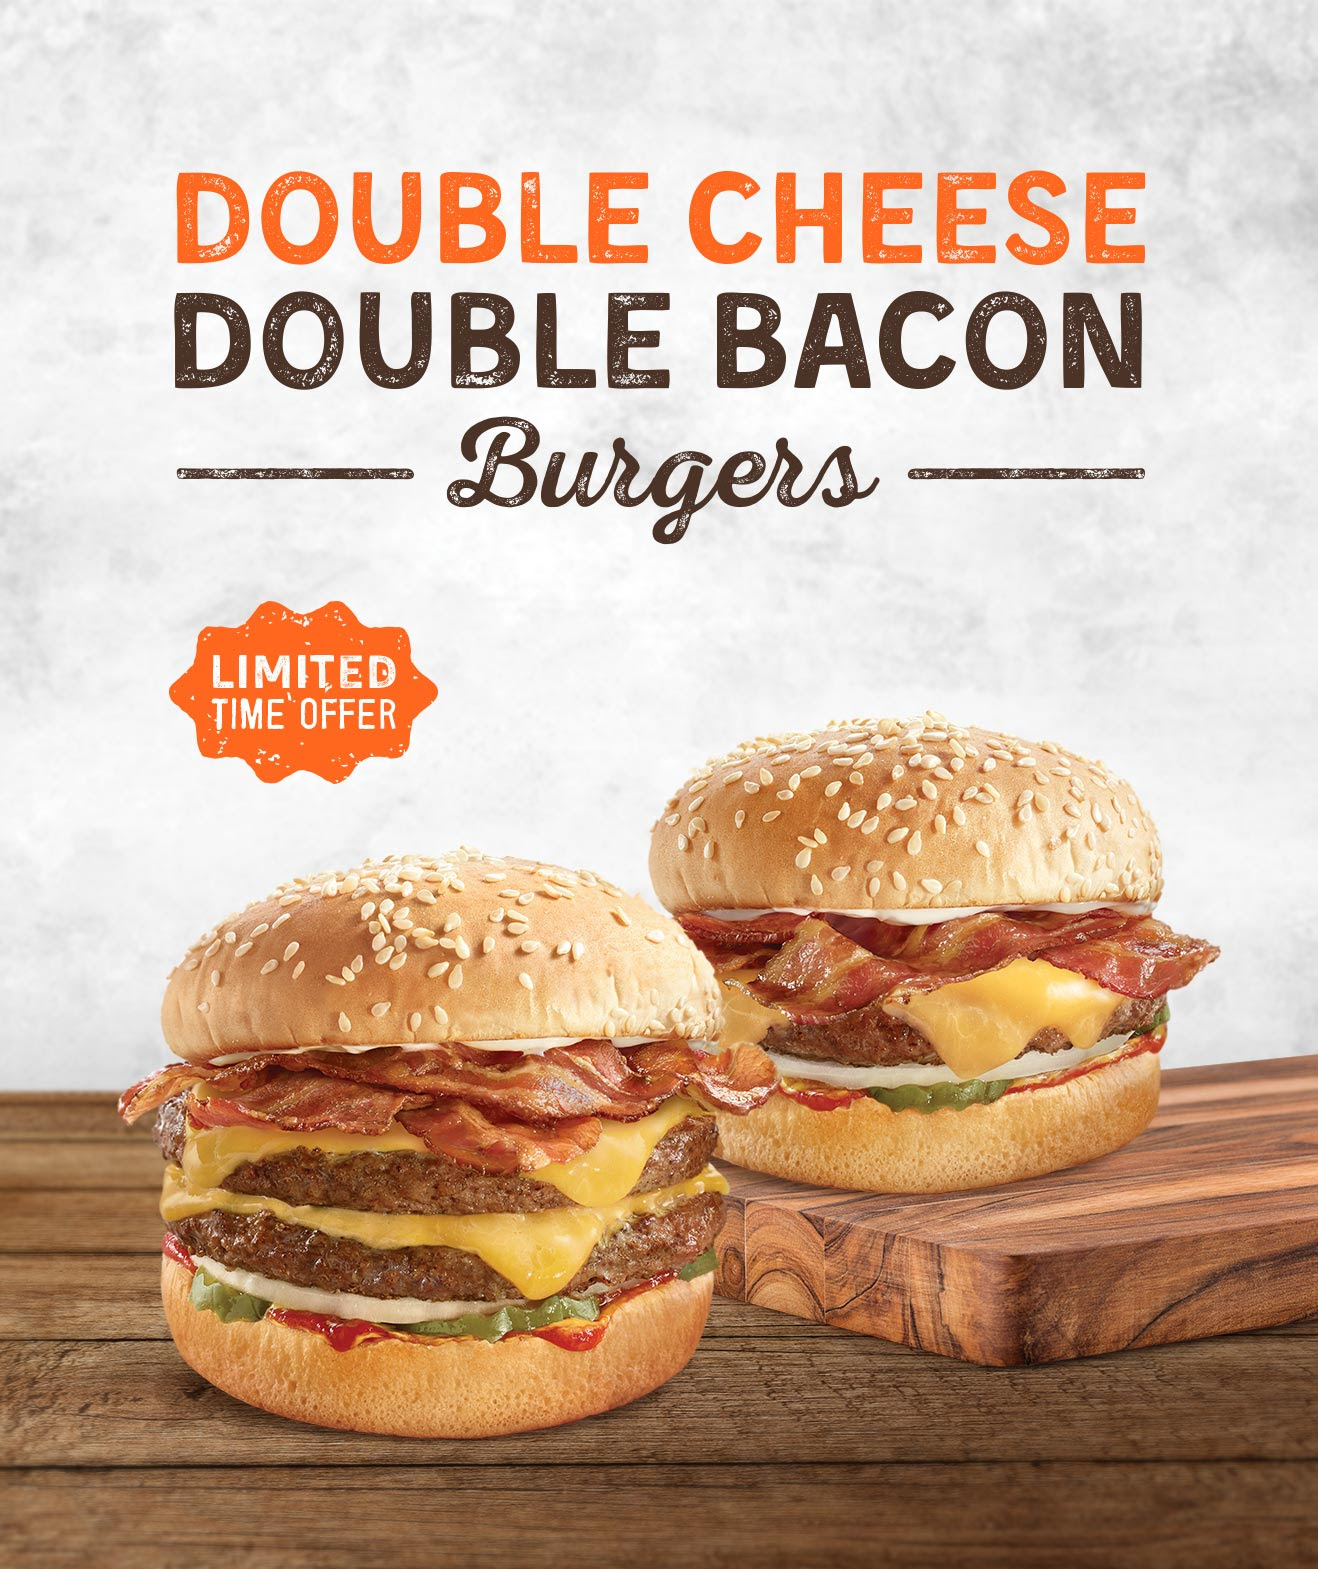 A&W Canada: Double Cheese, Double Bacon Burger - Foodology